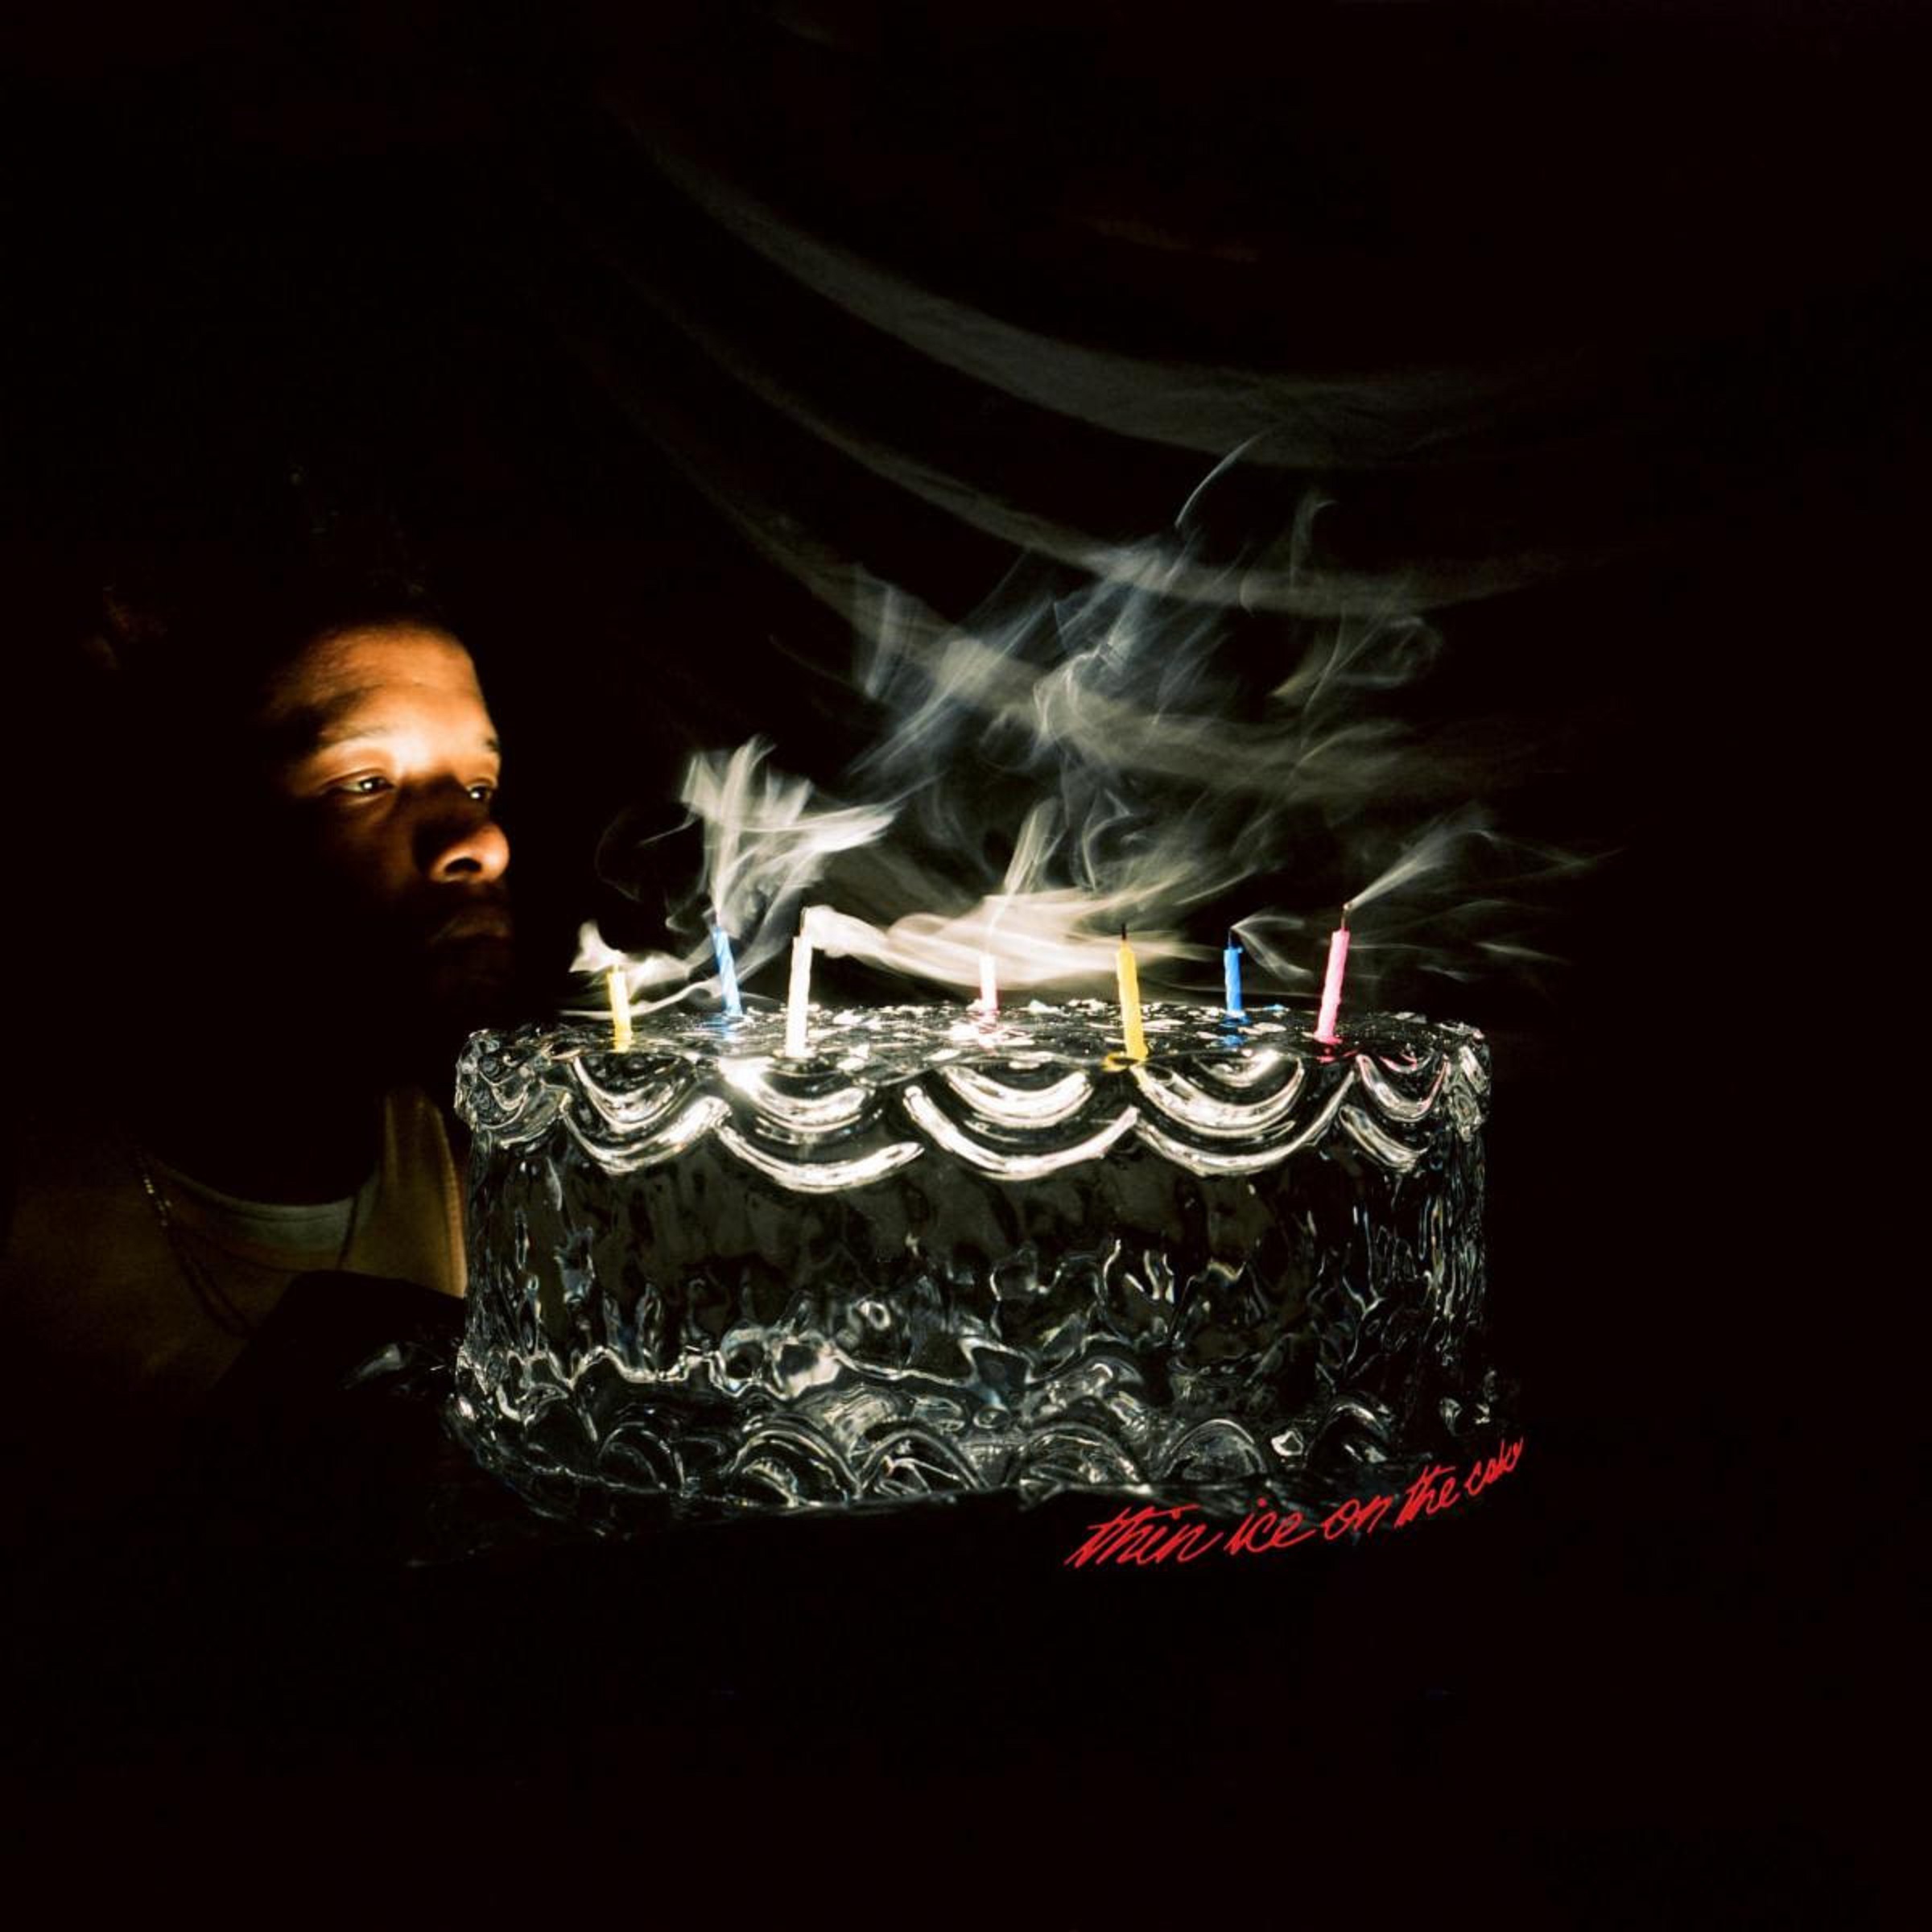 Cautious Clay Shares EP "Thin Ice on the Cake"